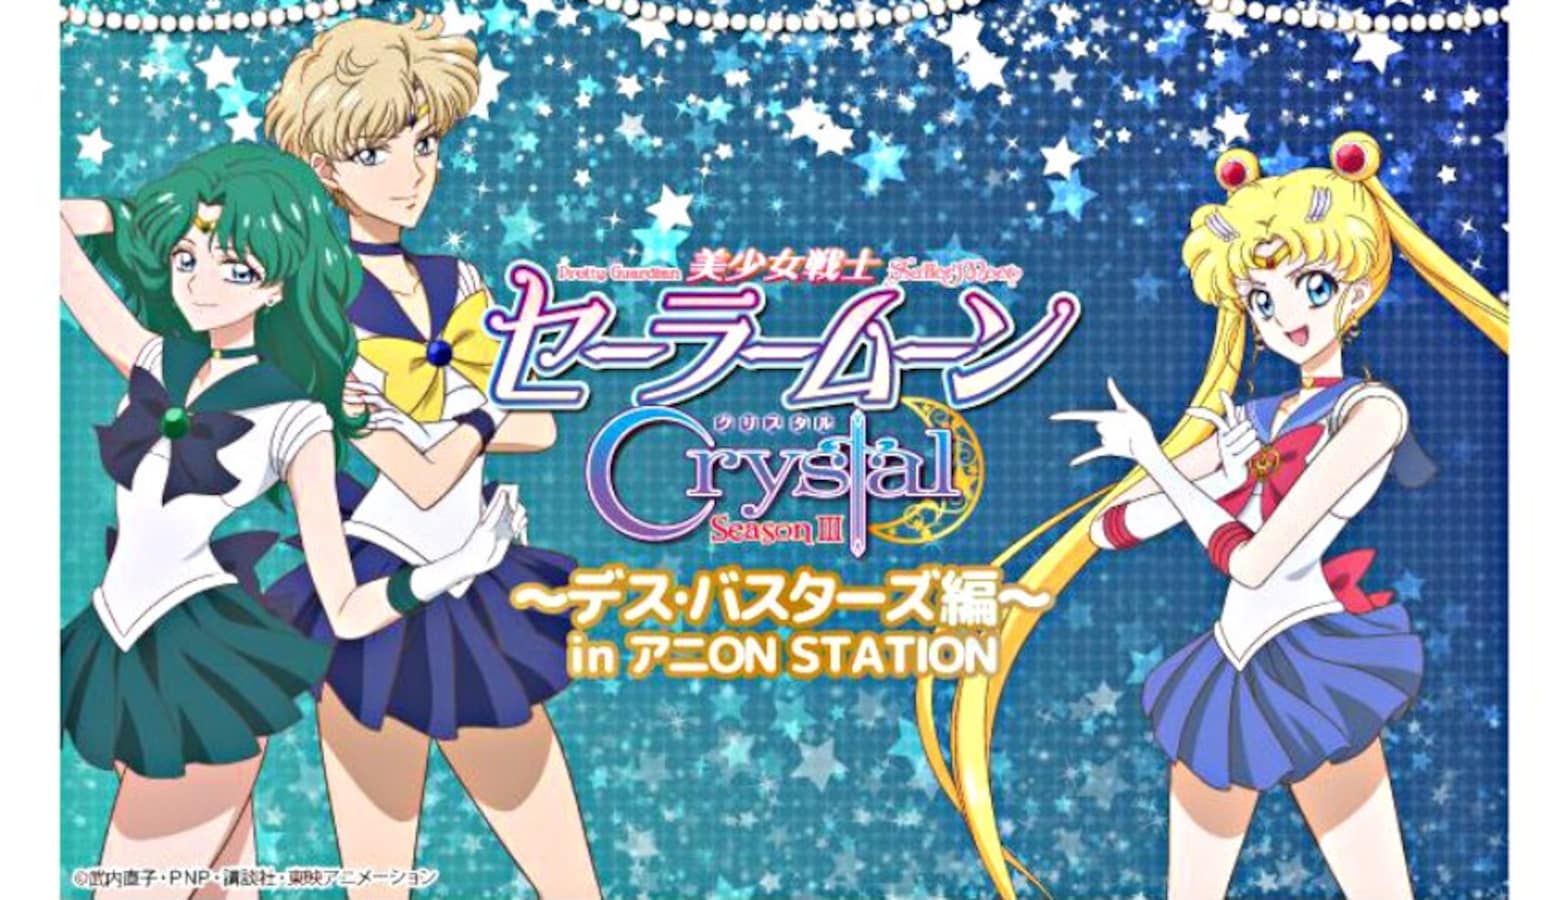 Sailor Moon Crystal Season 3 Settei - Ko-fi ❤️ Where creators get support  from fans through donations, memberships, shop sales and more! The original  'Buy Me a Coffee' Page.